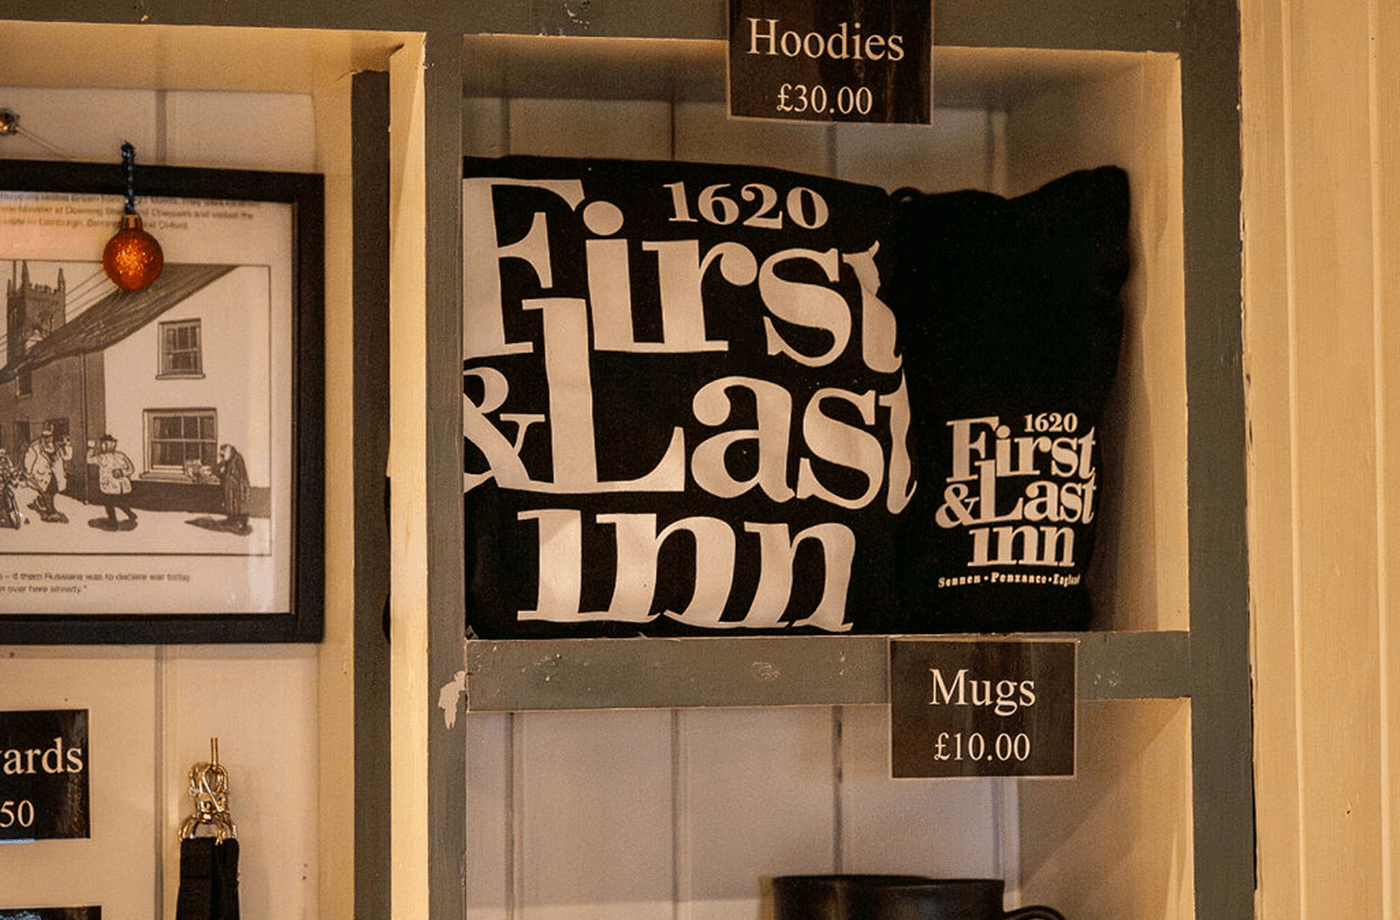 First and Last Inn